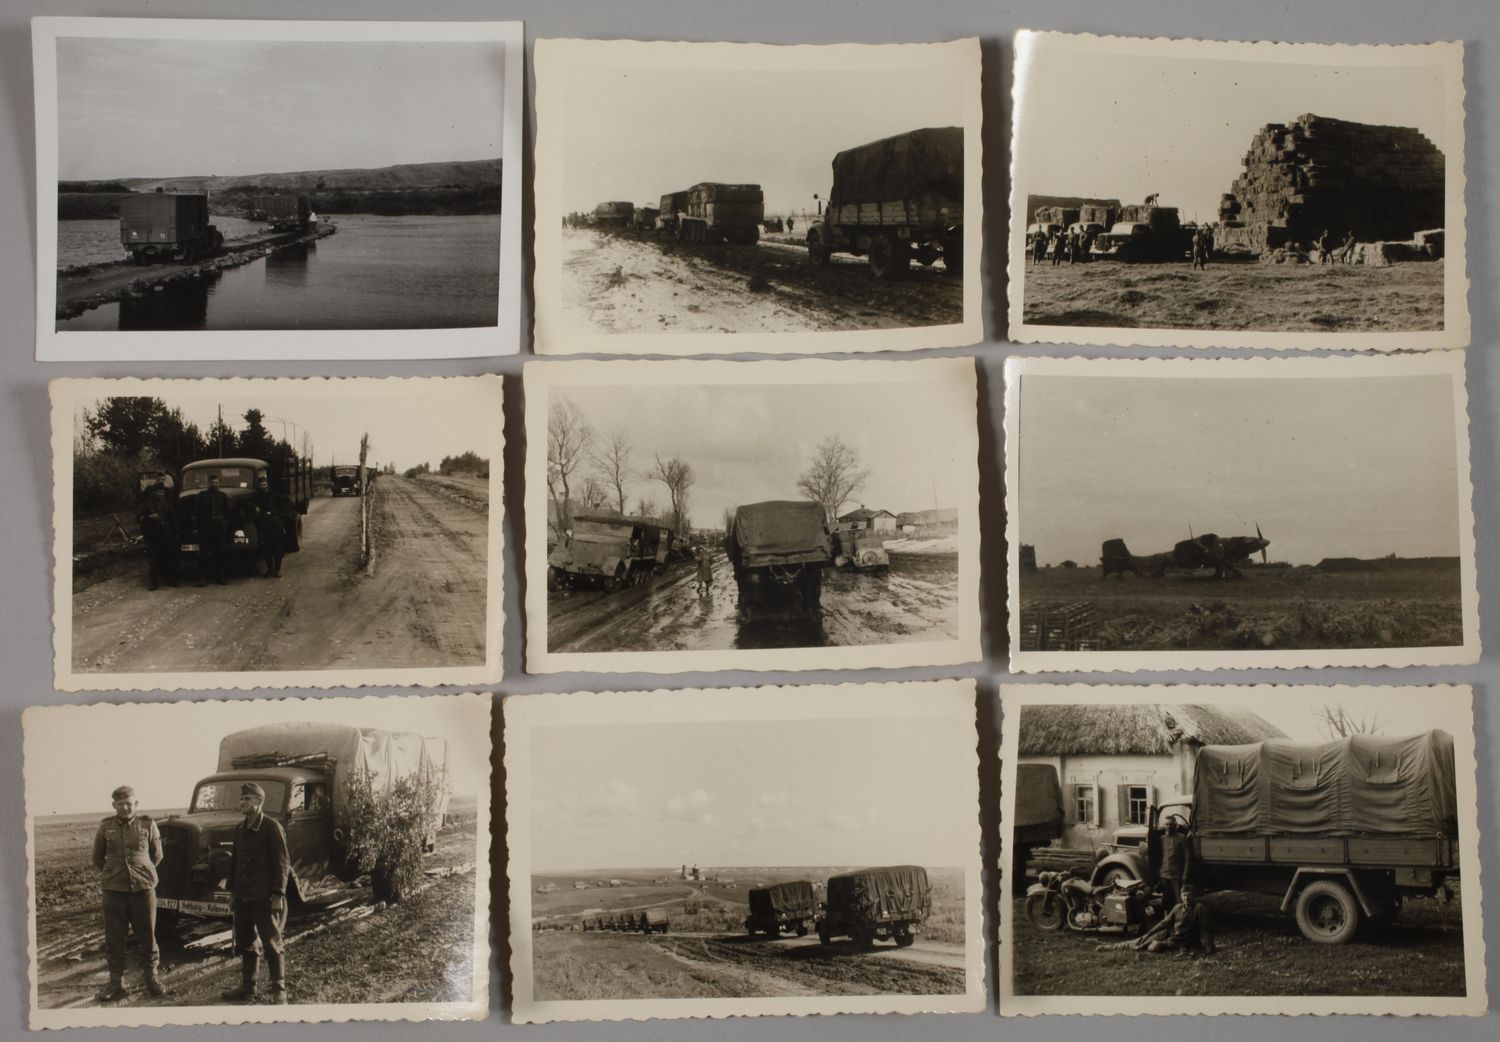 A collection of photos from World War II - Image 19 of 19